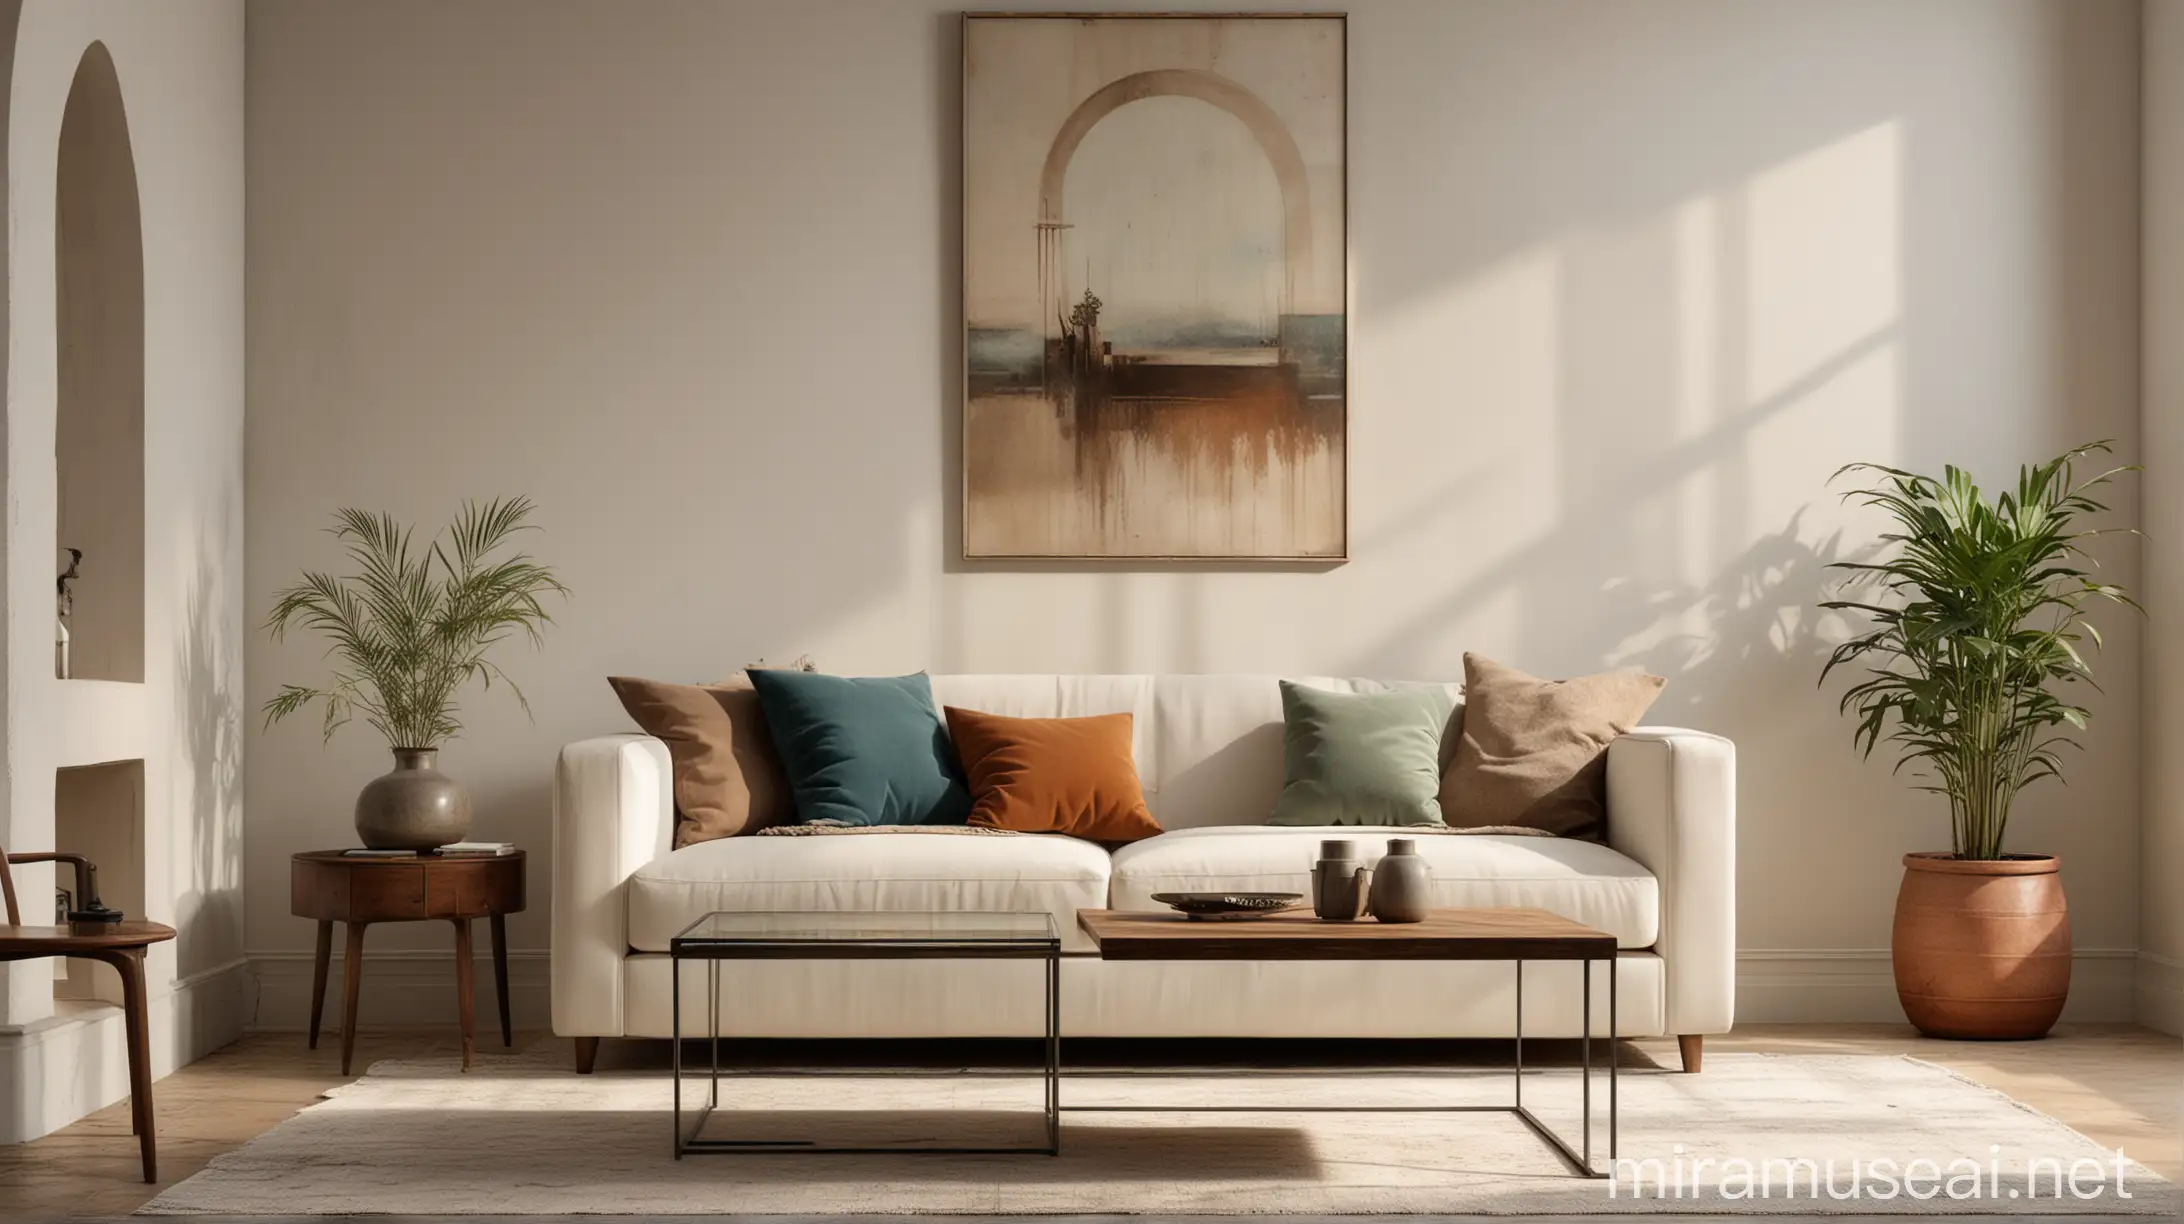 A moody, low-key photo of a grunge old accent coffee table near a white sofa against an arched window and white wall with a big art poster frame. The light is soft and warm, casting long shadows across the room, with a color palette of dusty blues, muted greens, and warm browns. Minimalist, art deco interior design of a modern living room.